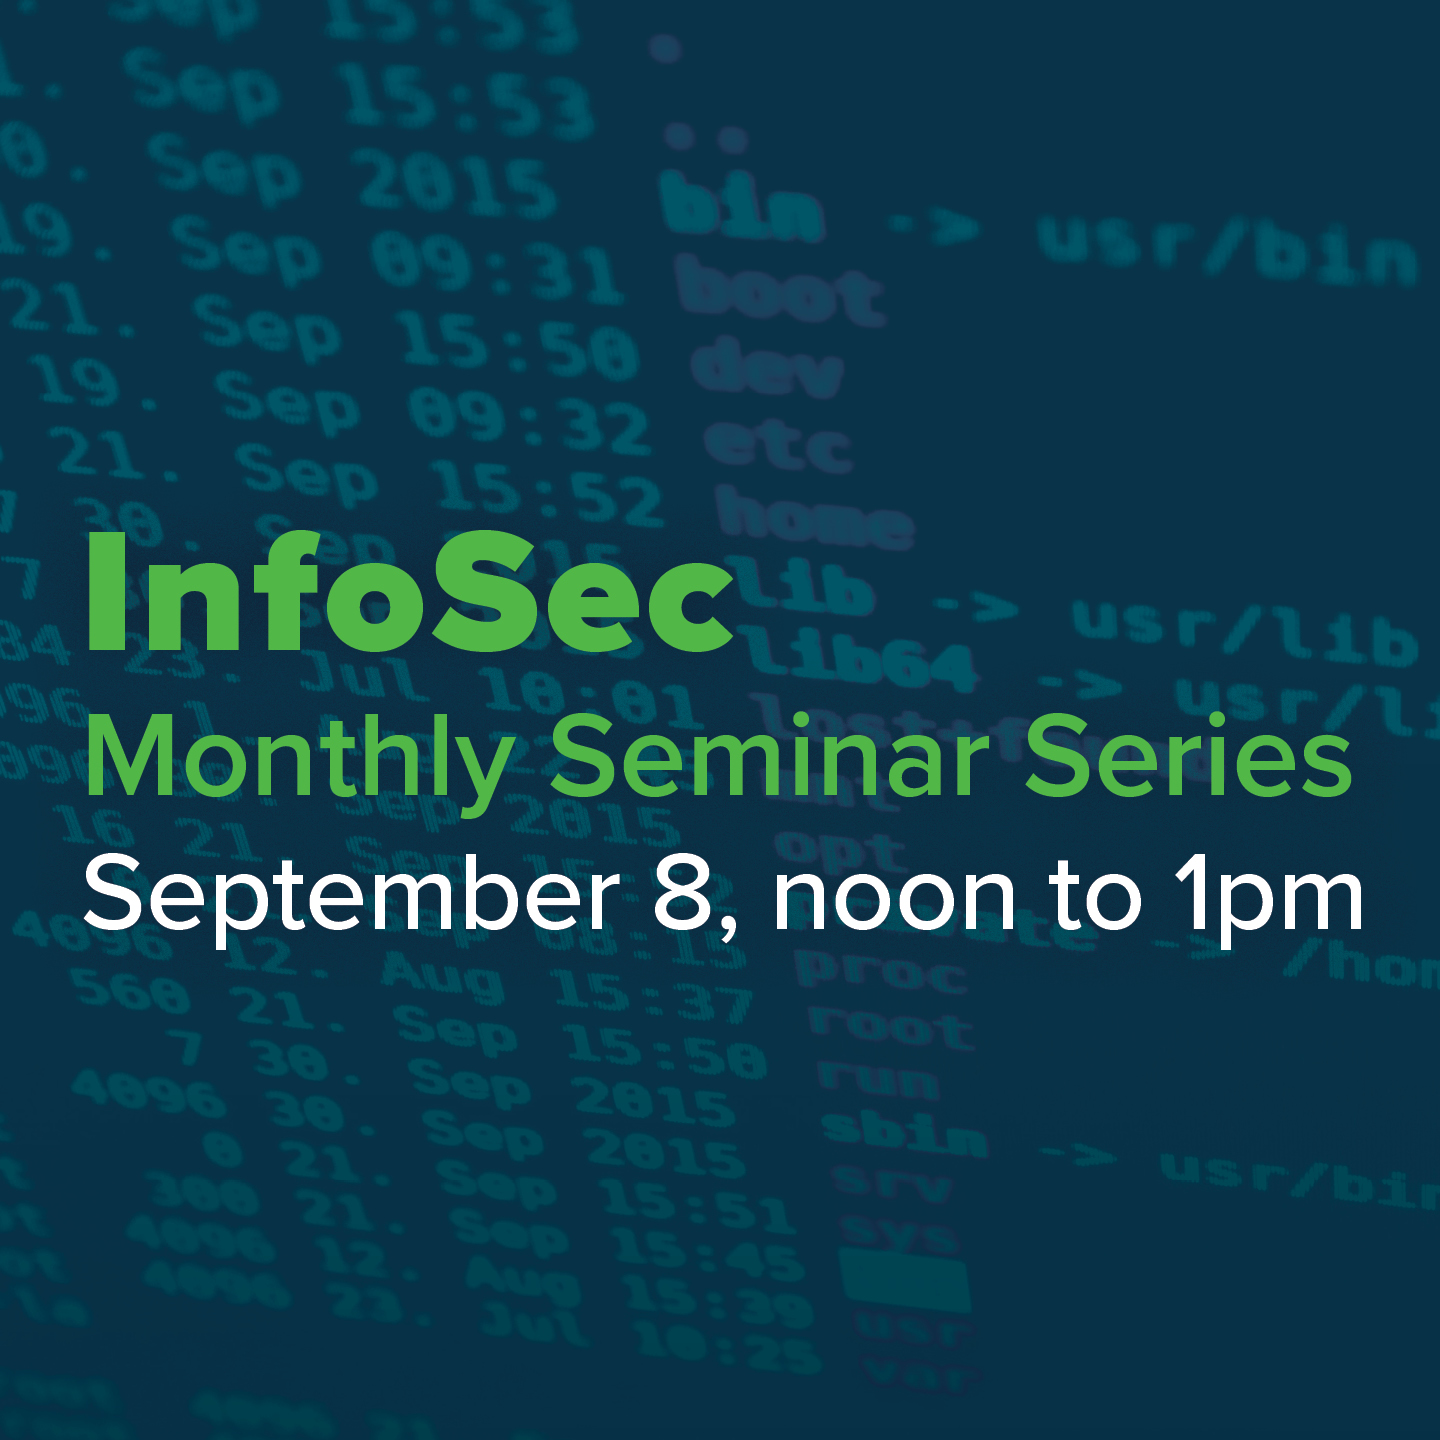 Join us for our next InfoSec Seminar on Sept 8